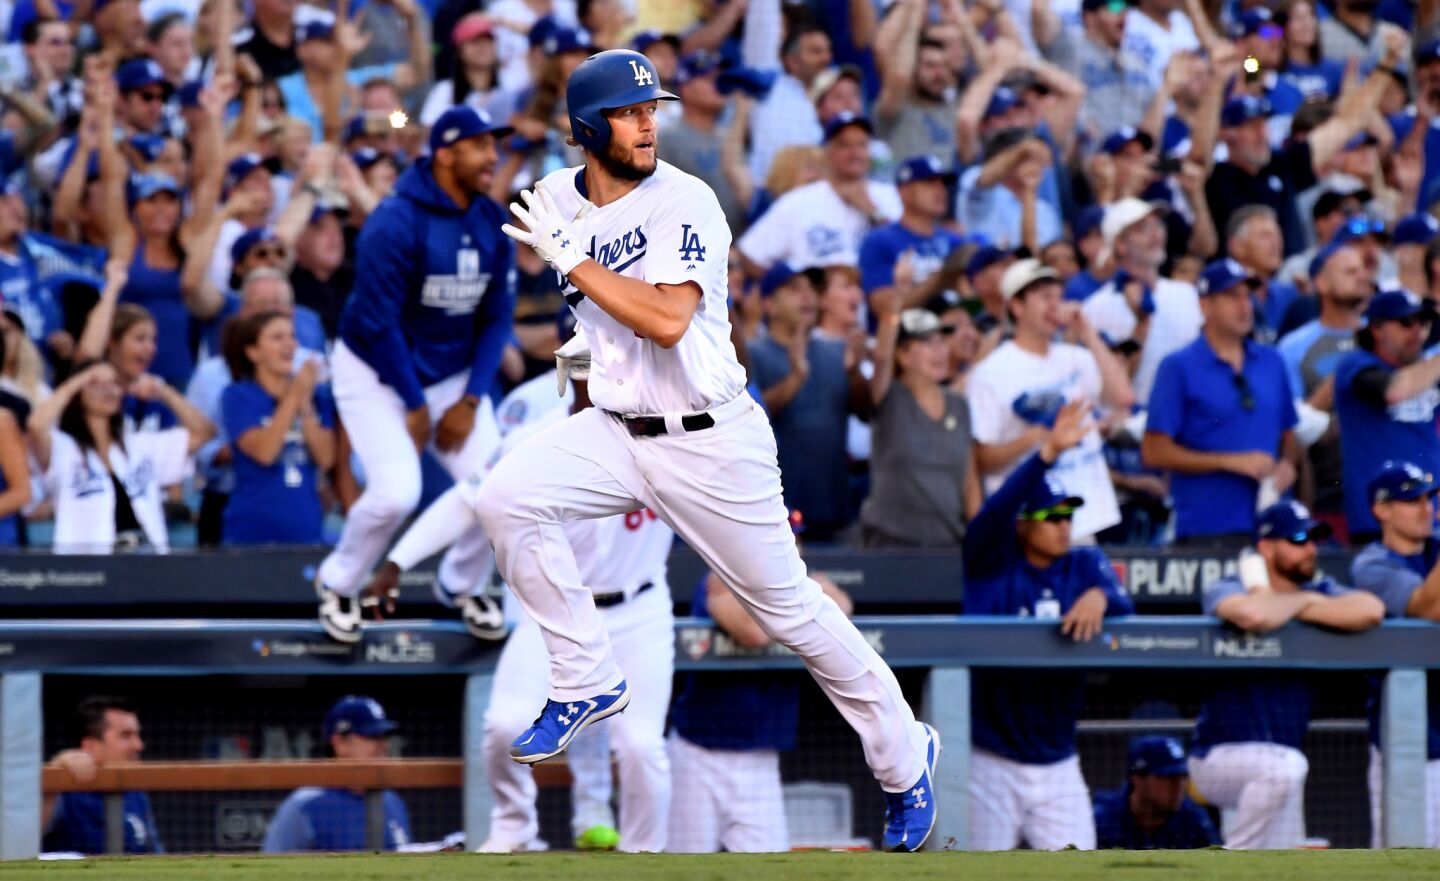 Clayton Kershaw scores a run on Justin Turner's RBI against the Brewers in the 7th inning.